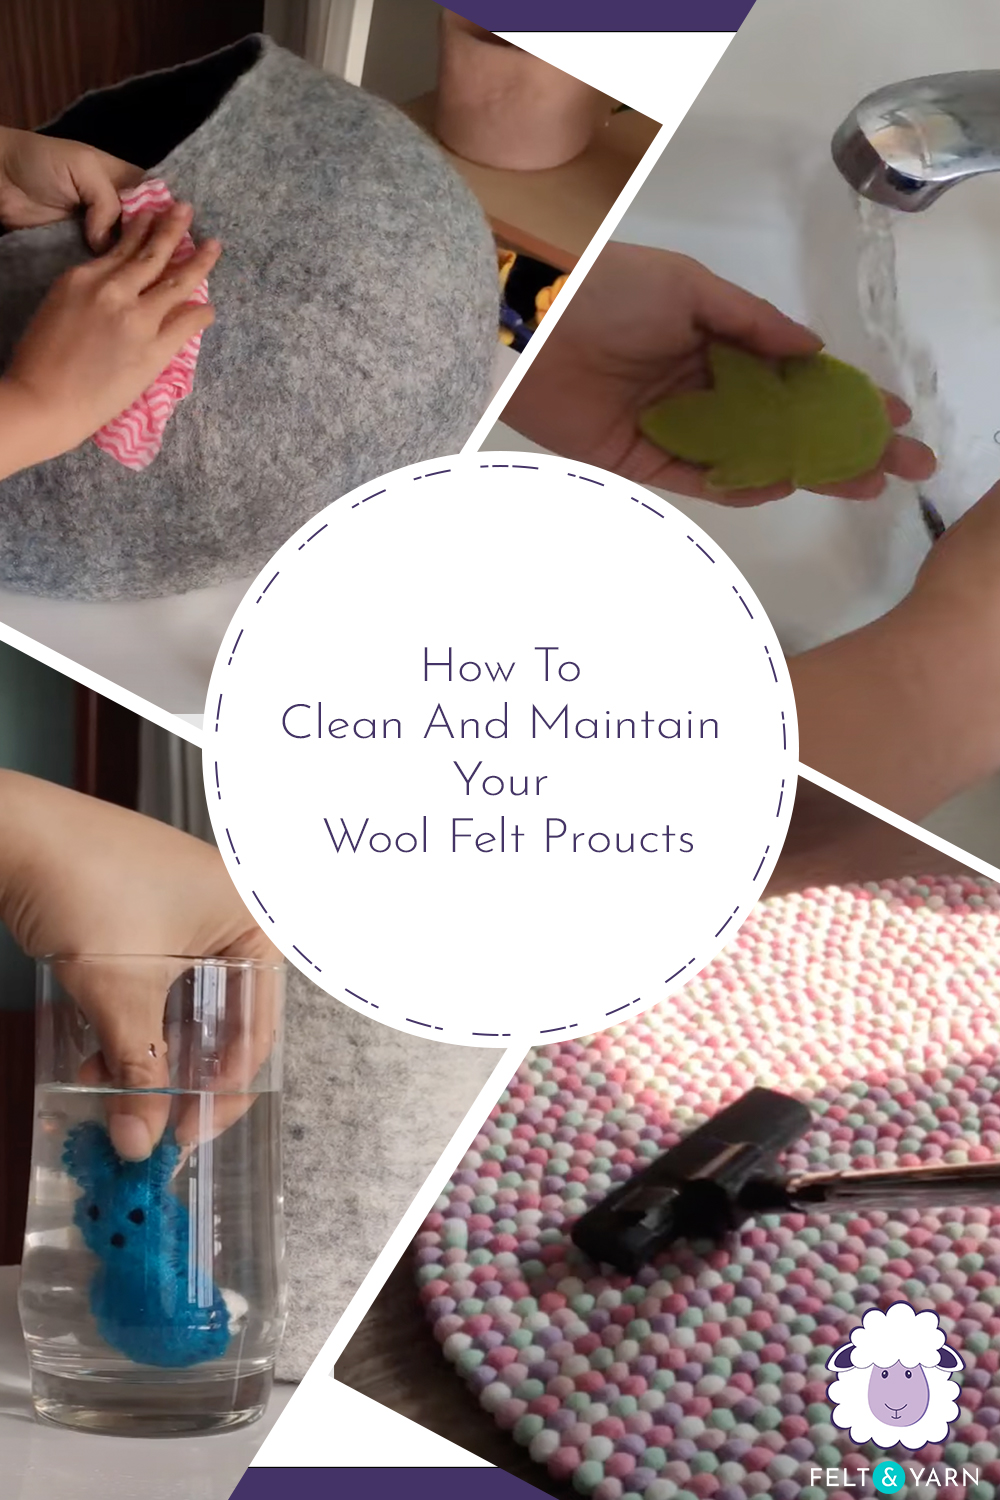 The Ultimate Guide to Drying Felt Fabric